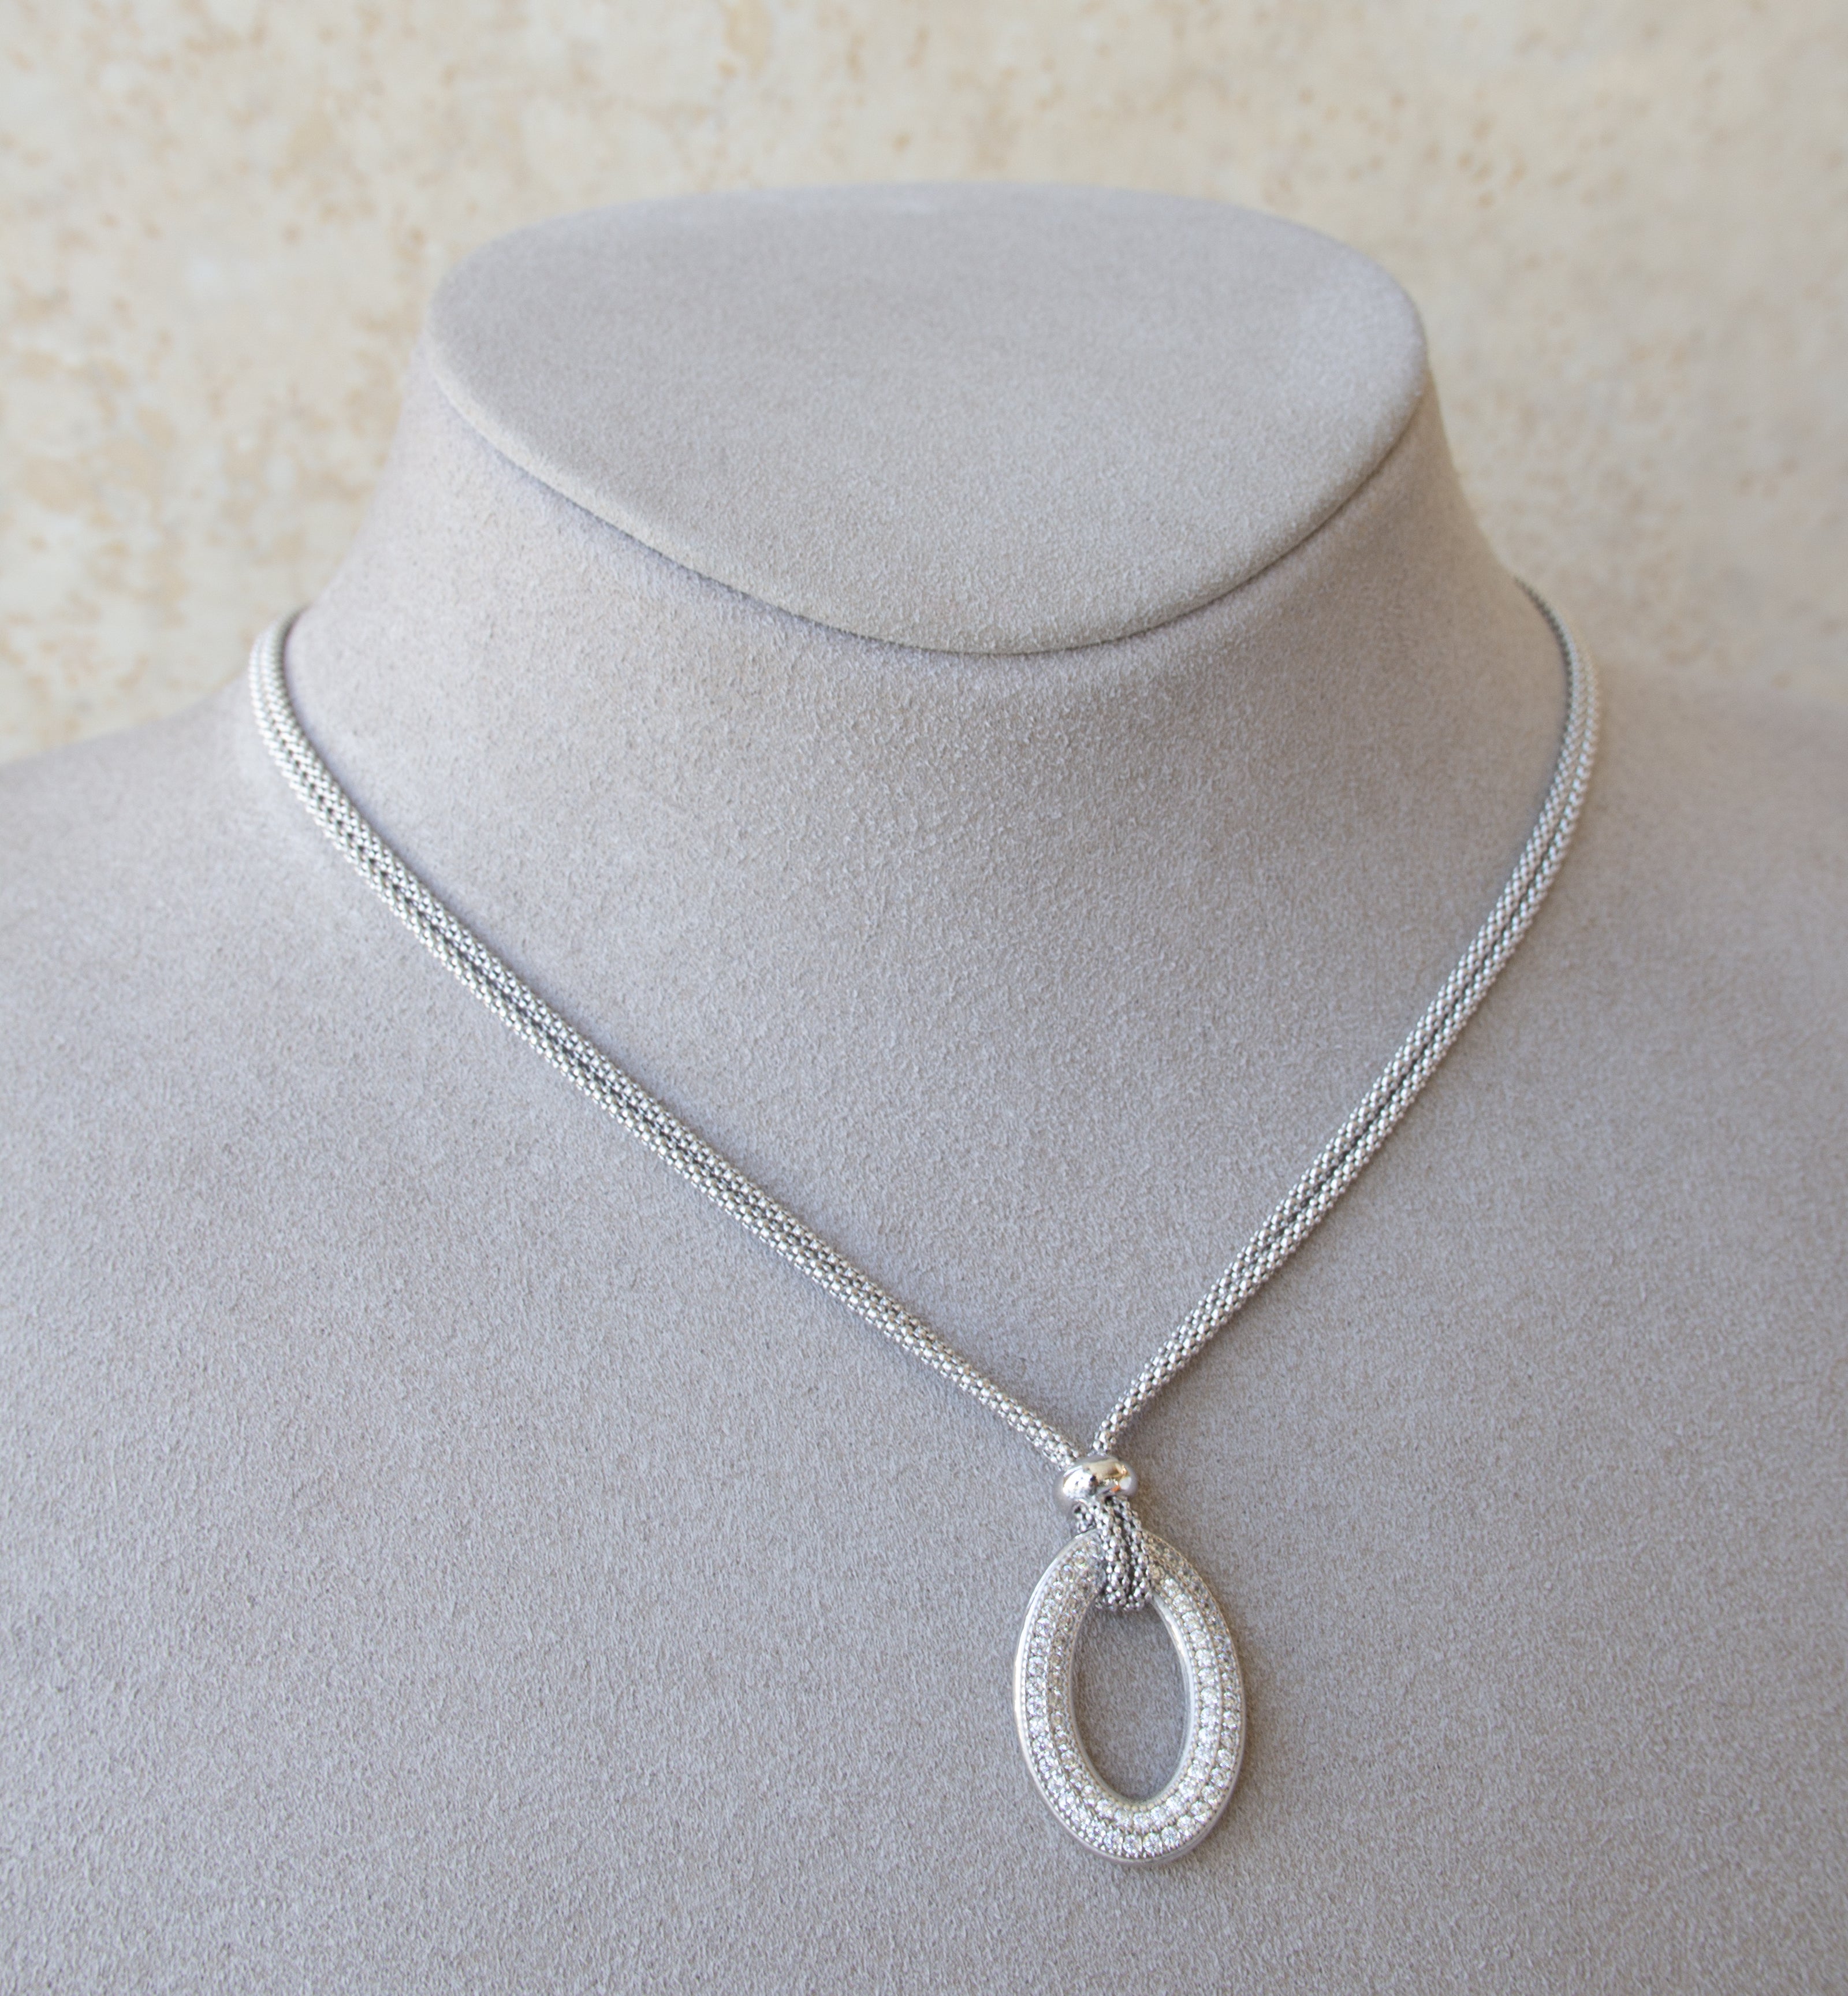 Silver 925 Oval Necklace with Cubic Zircon Stones